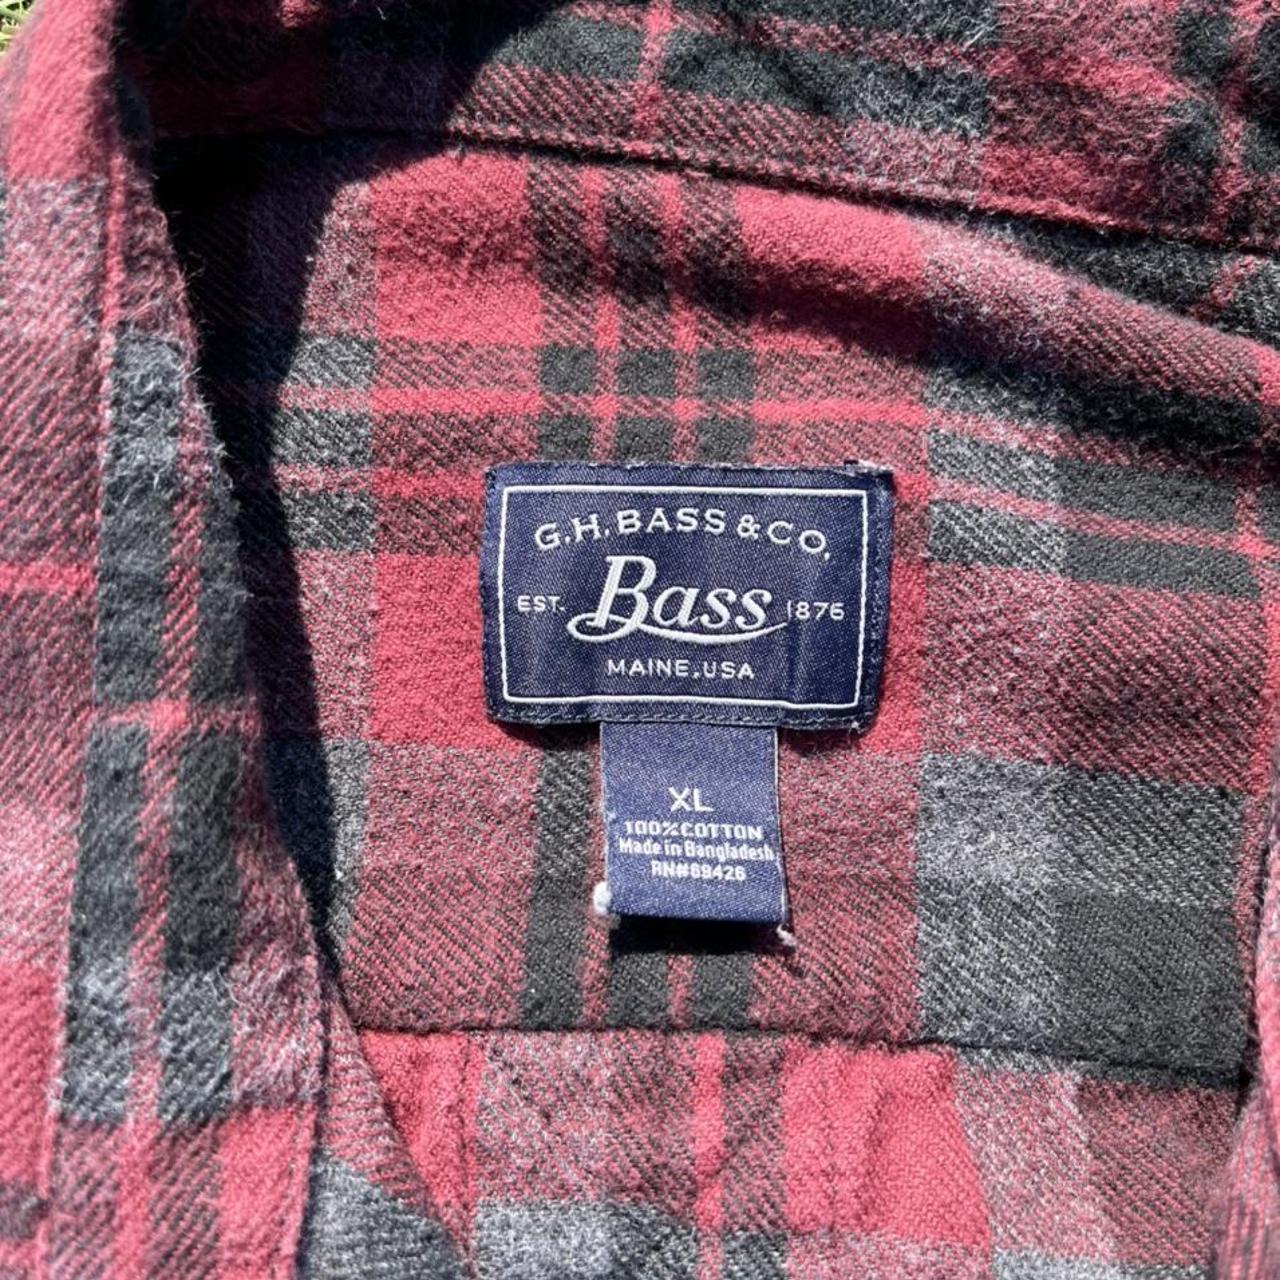 Product Image 2 - G.H. Bass - Flannel 👕

Size